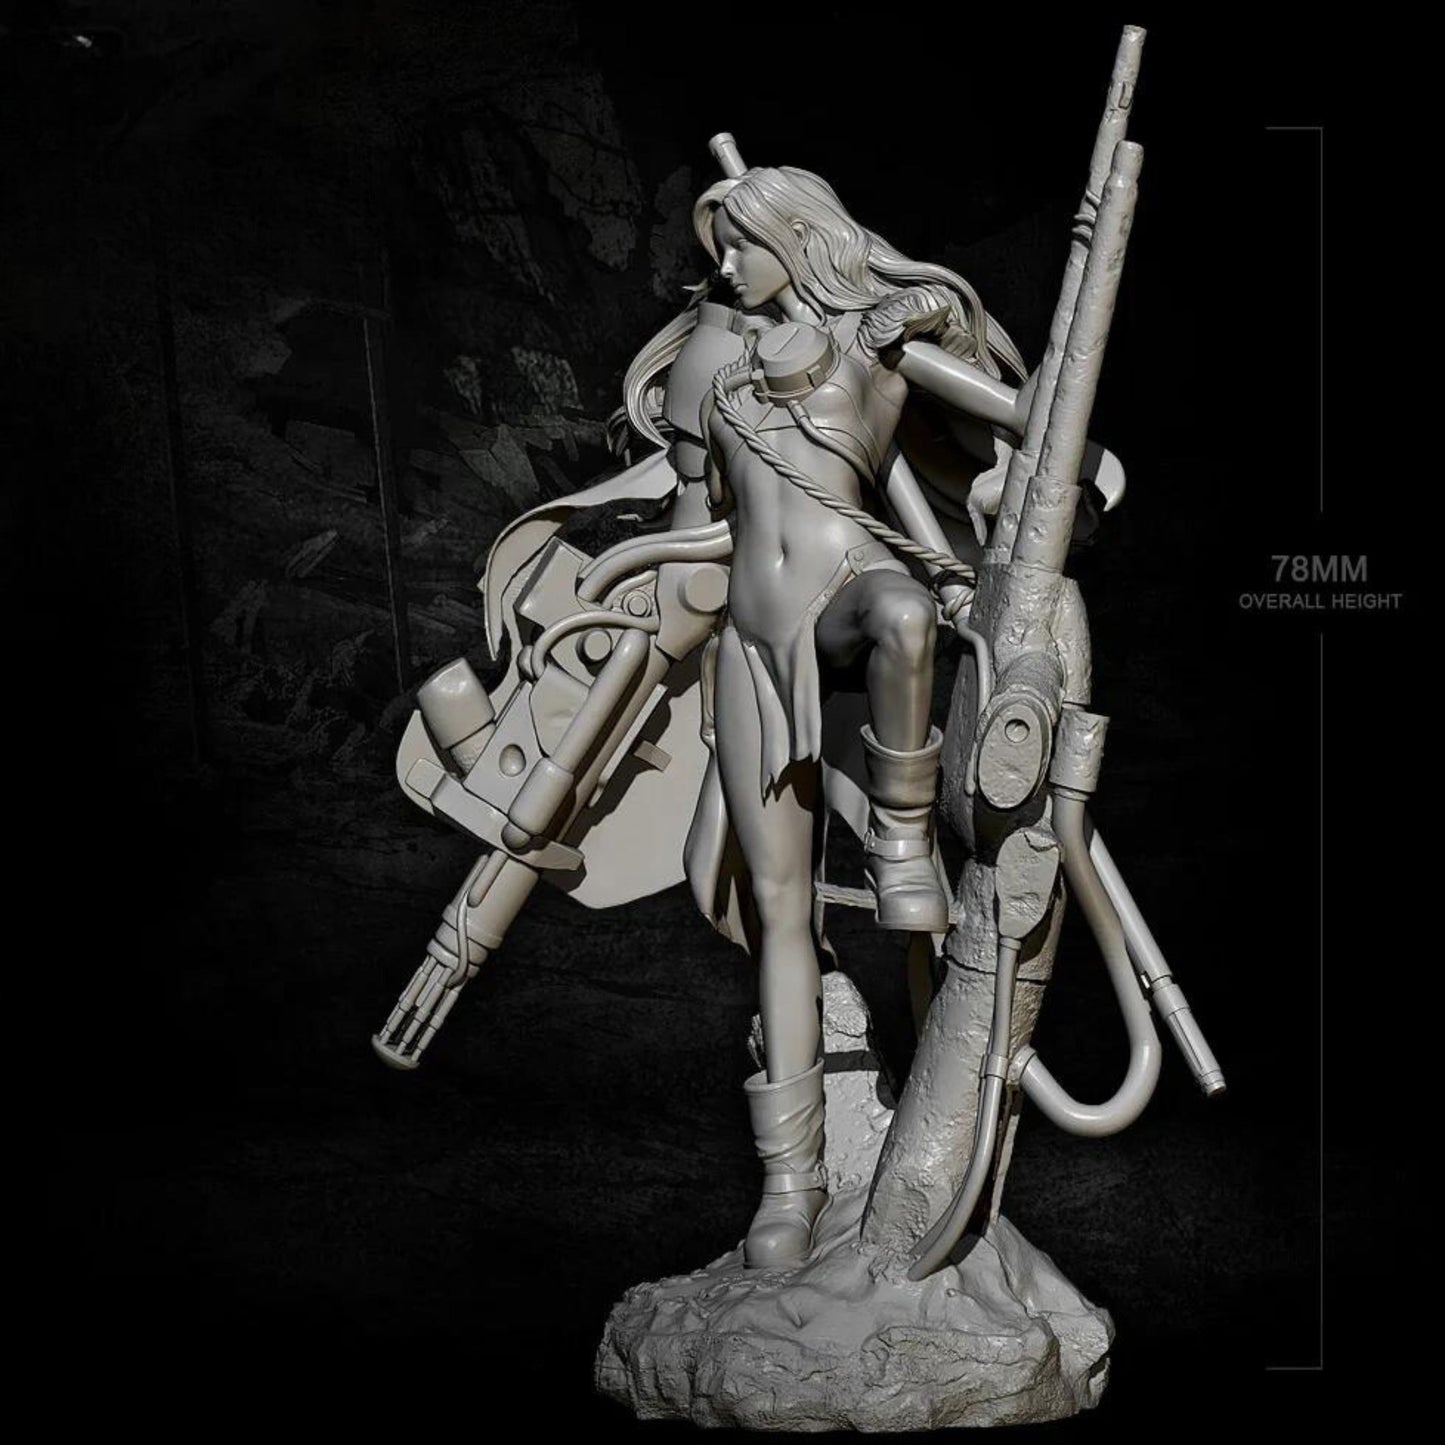 18+ Collector's 3D Printed Model: 78mm Resin model kits figure self-assembled.